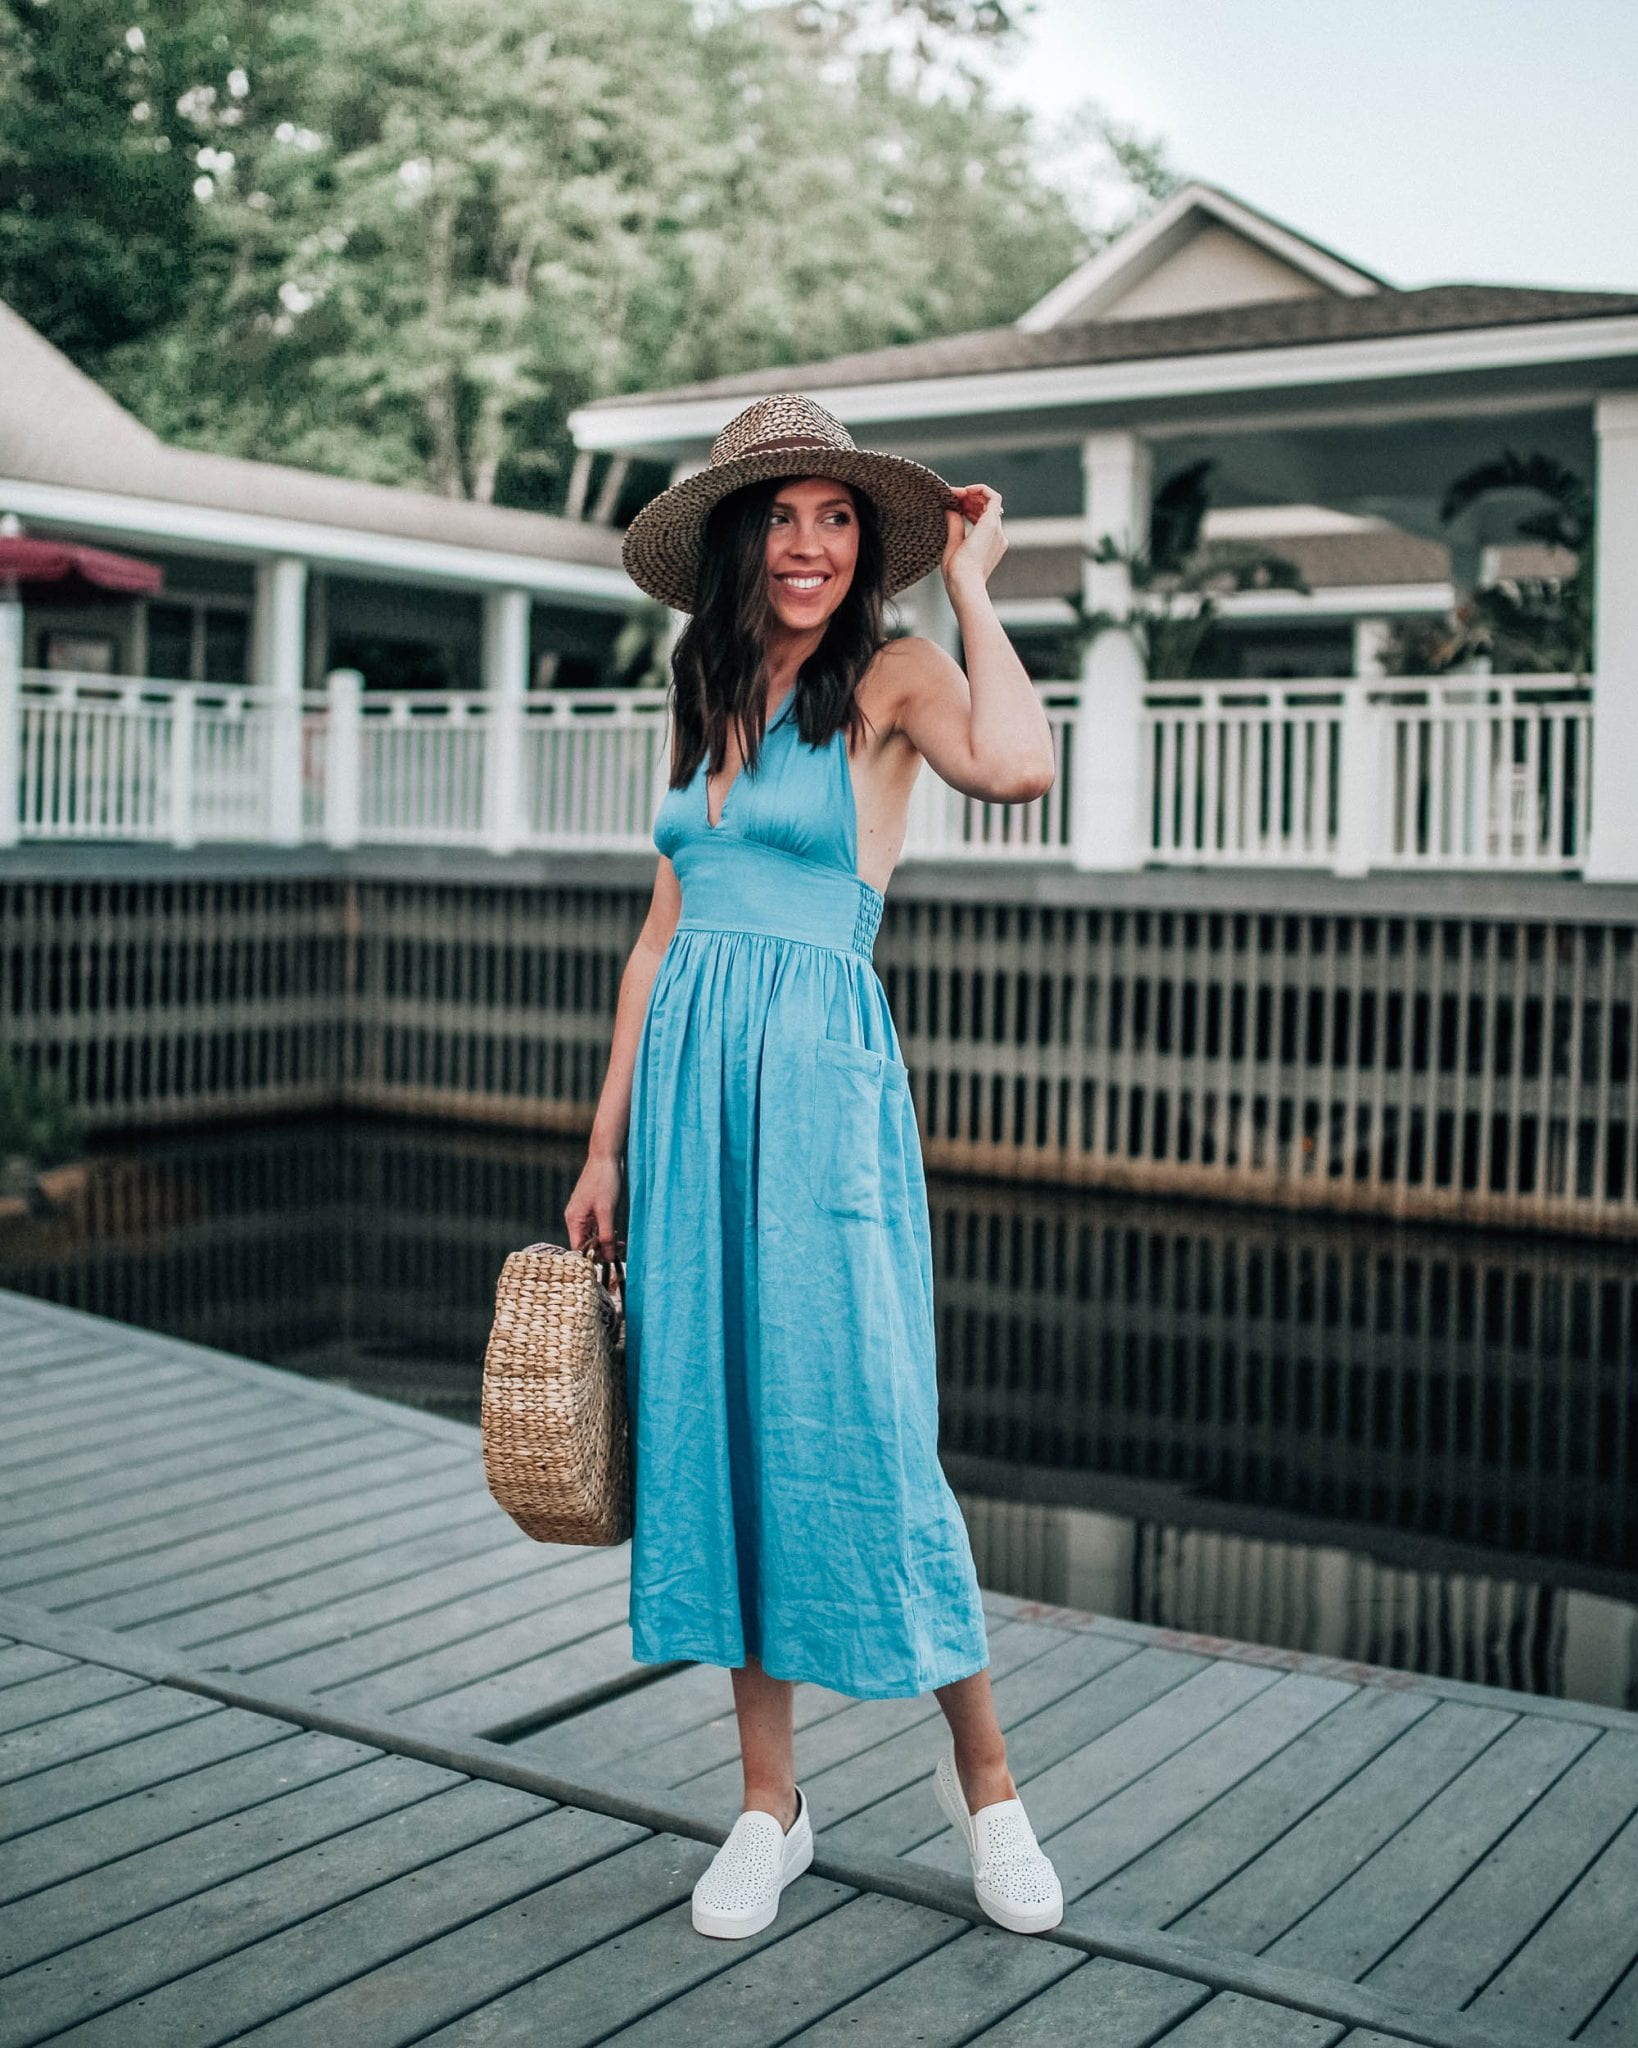 Top Linen Finds of the Season - Pretty in the Pines, North Carolina ...